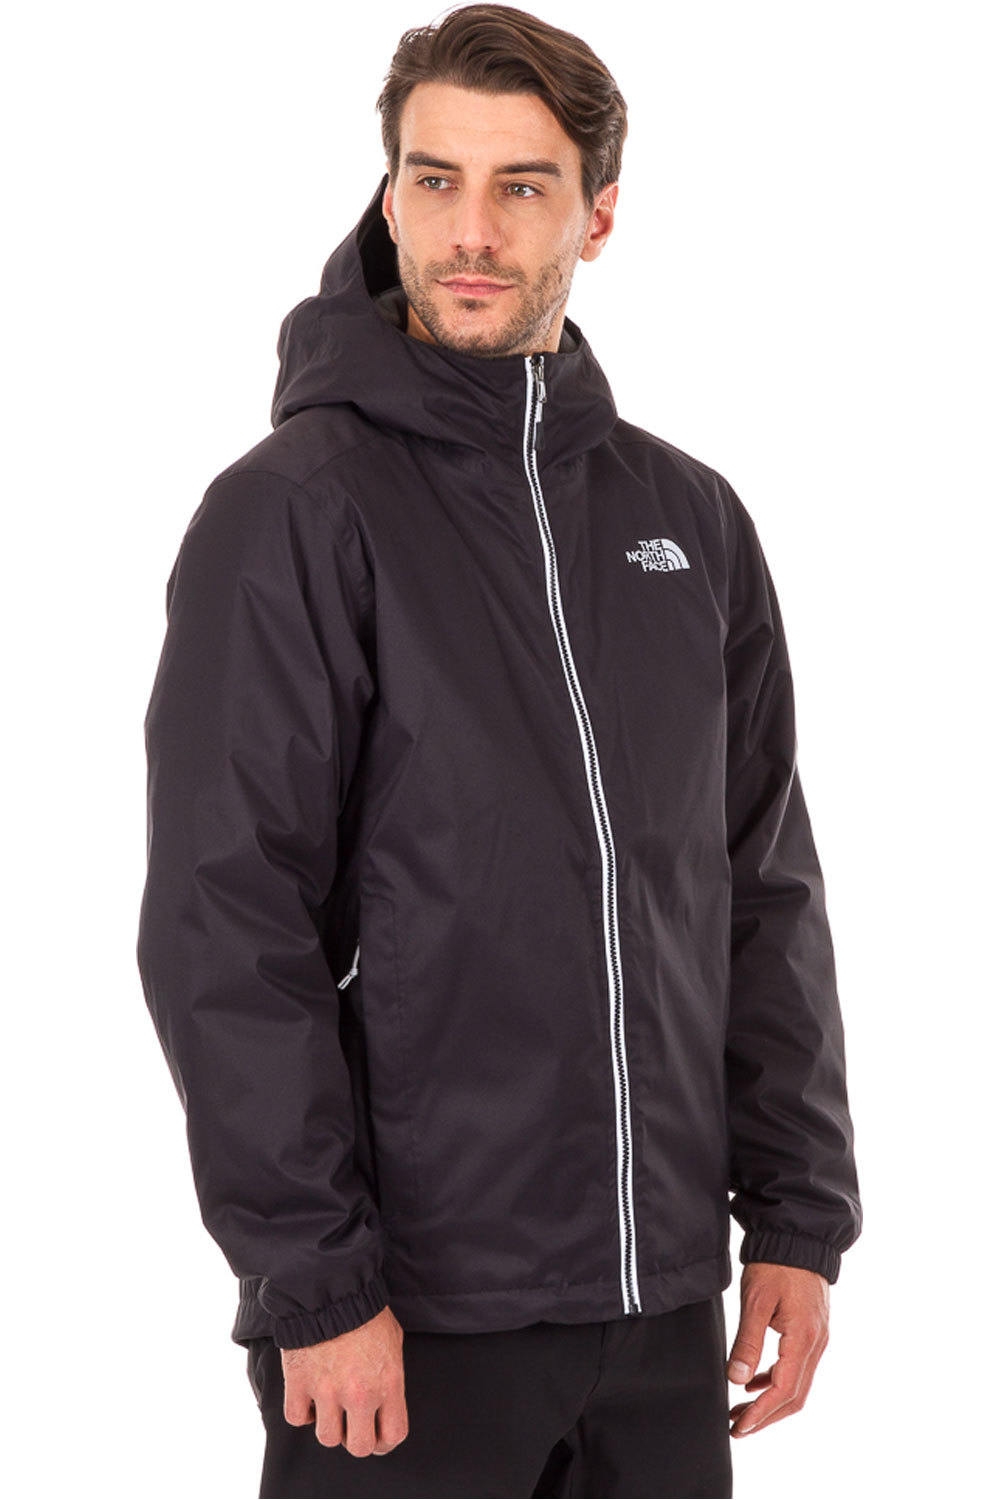 The North Face chaqueta impermeable insulada hombre M QUEST INSULATED JK vista frontal